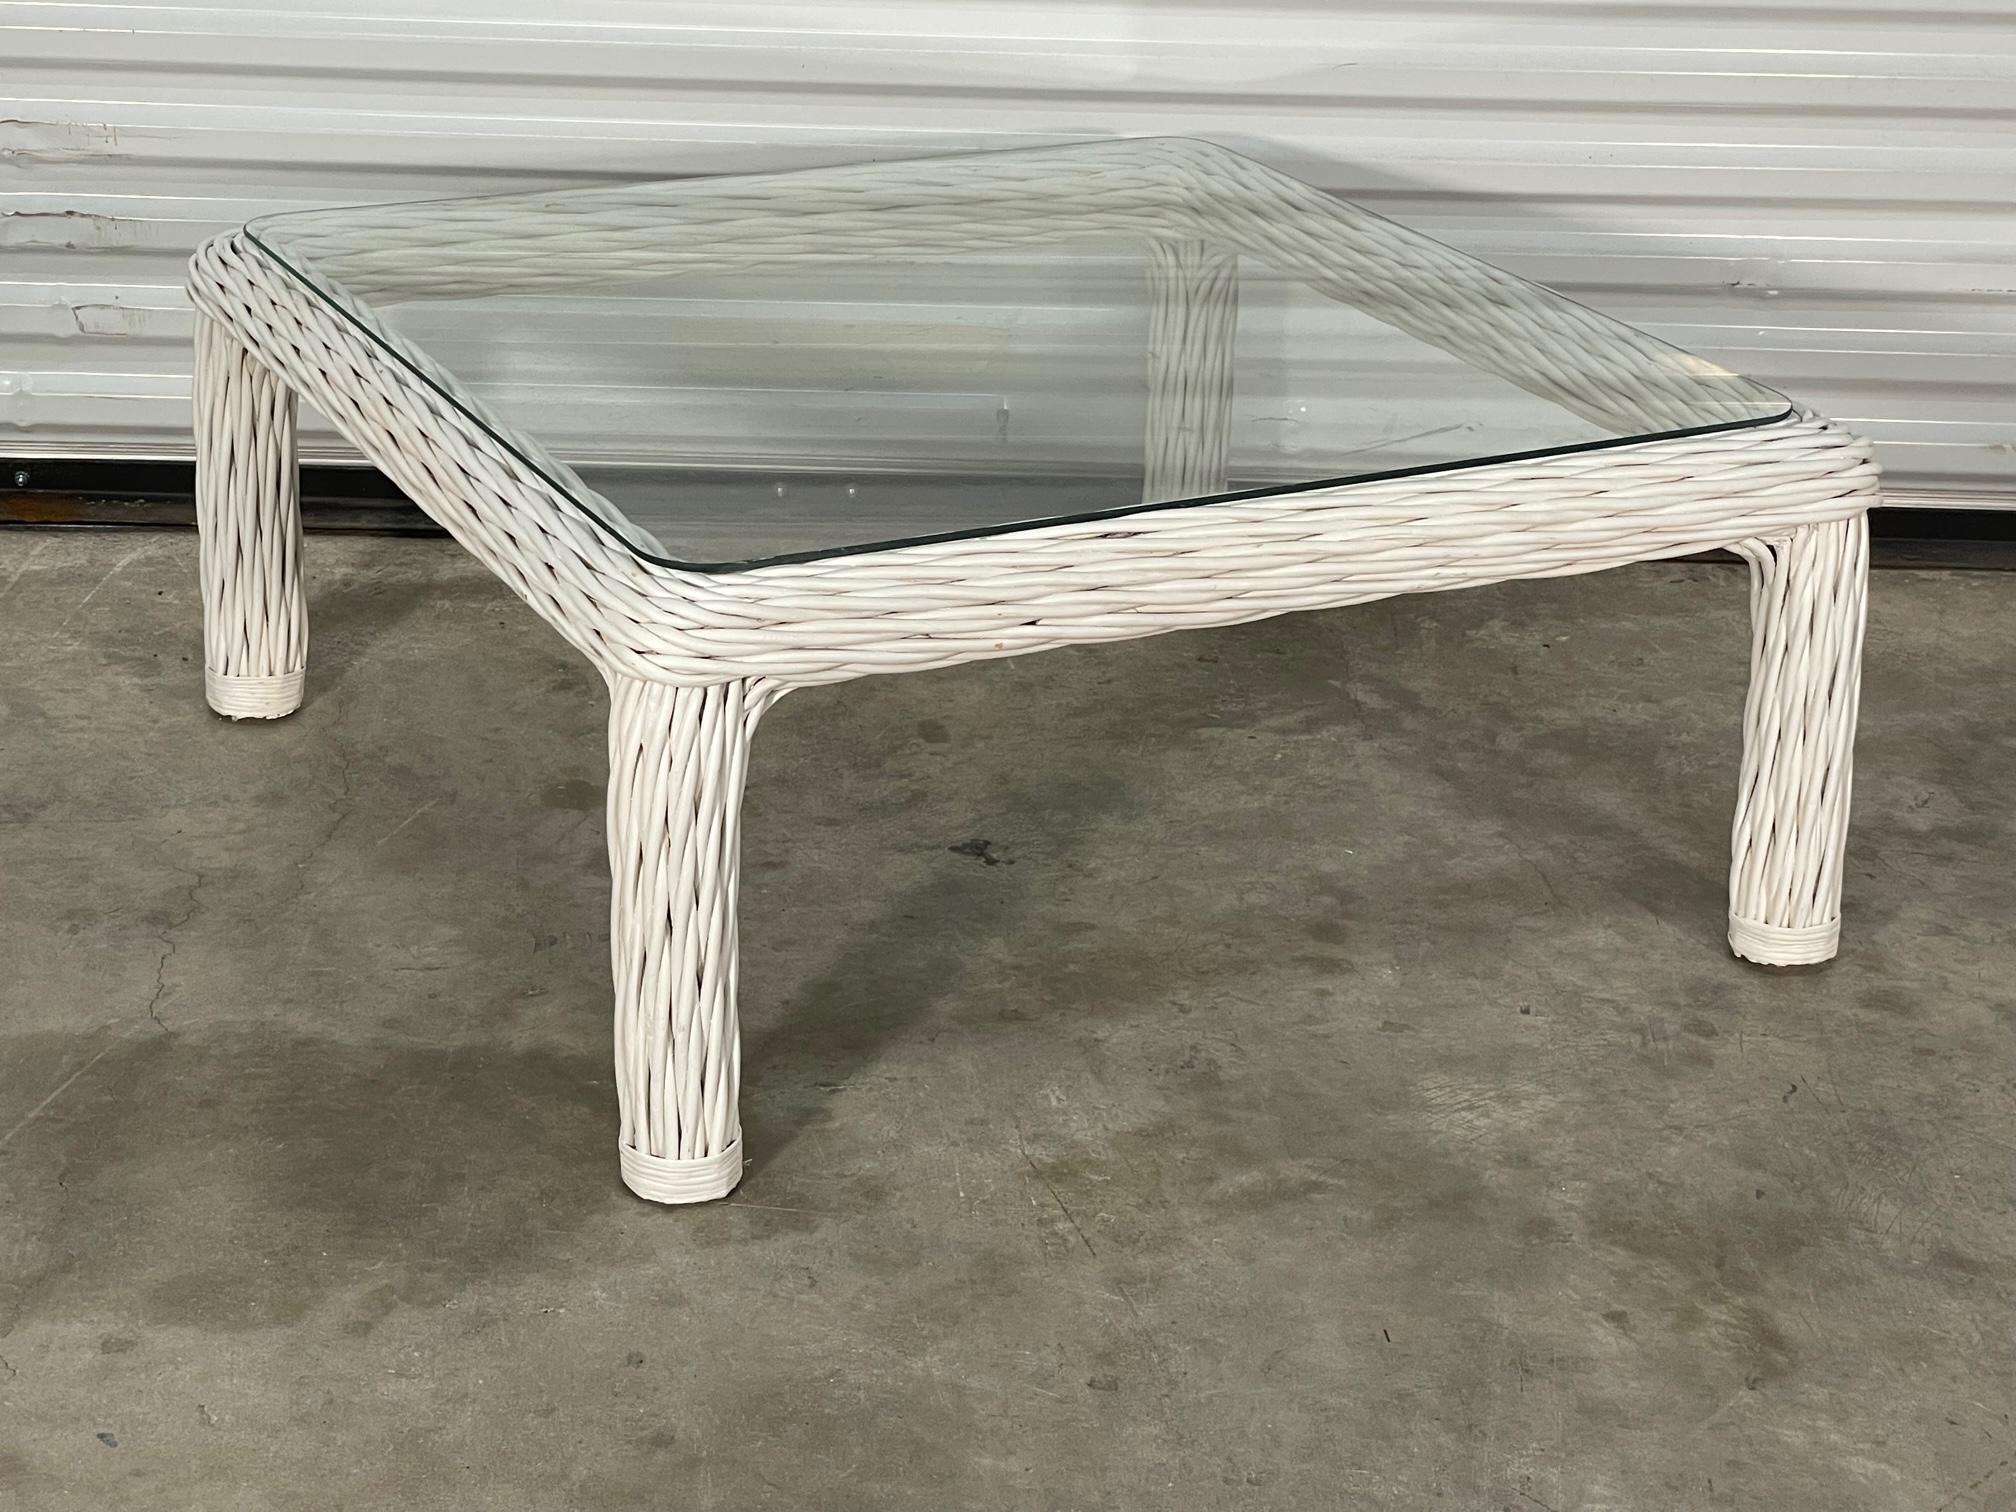 Organic modern coffee table features frame of twisted rattan and glass top. Good condition with imperfections consistent with age. May exhibit scuffs, marks, or wear, see photos for details. We offer professional refinishing services.
    
   